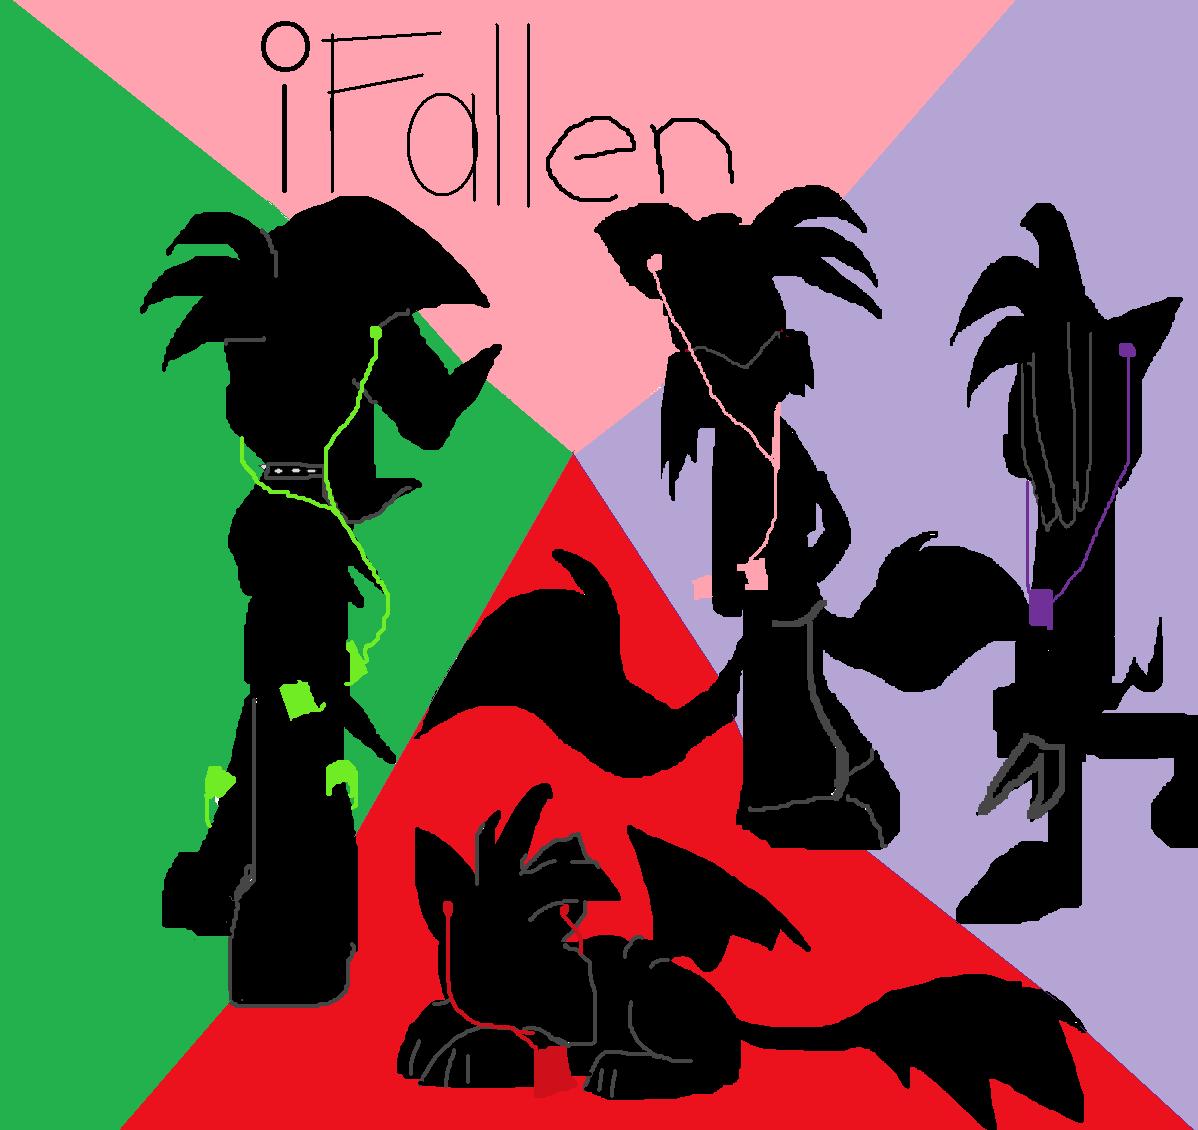 ifallen-ipod related by Forestdahedgehog